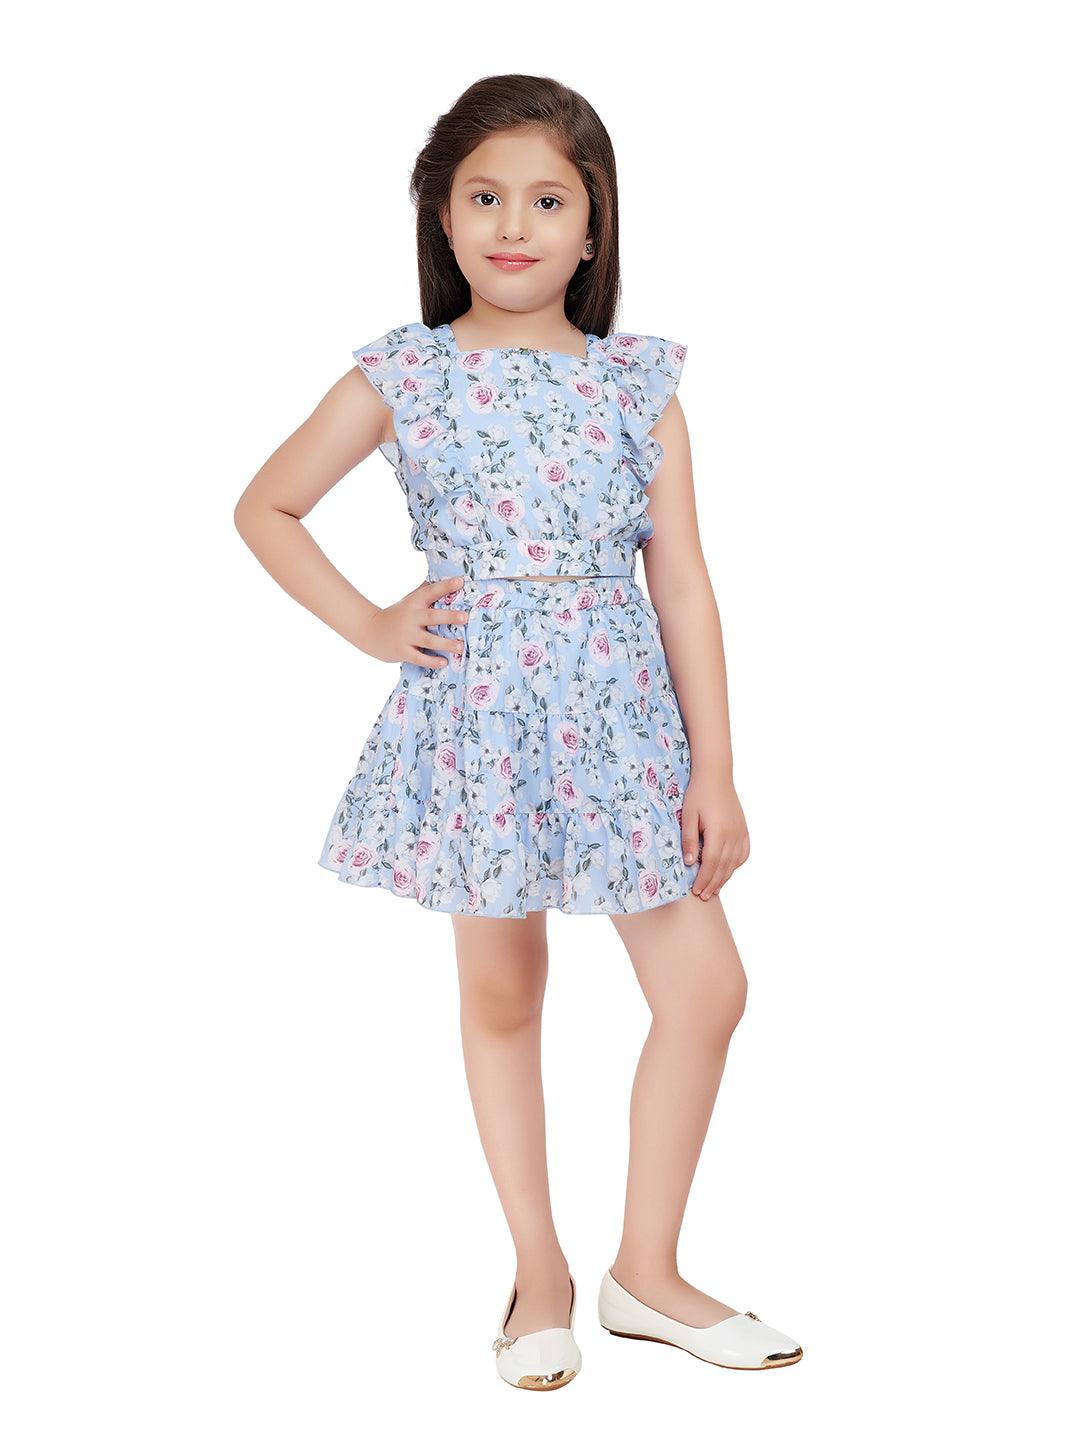 Sky Blue Colored Skirt Top set - 2095 Sky Blue - TINY BABY INDIA shop.tinybaby.in